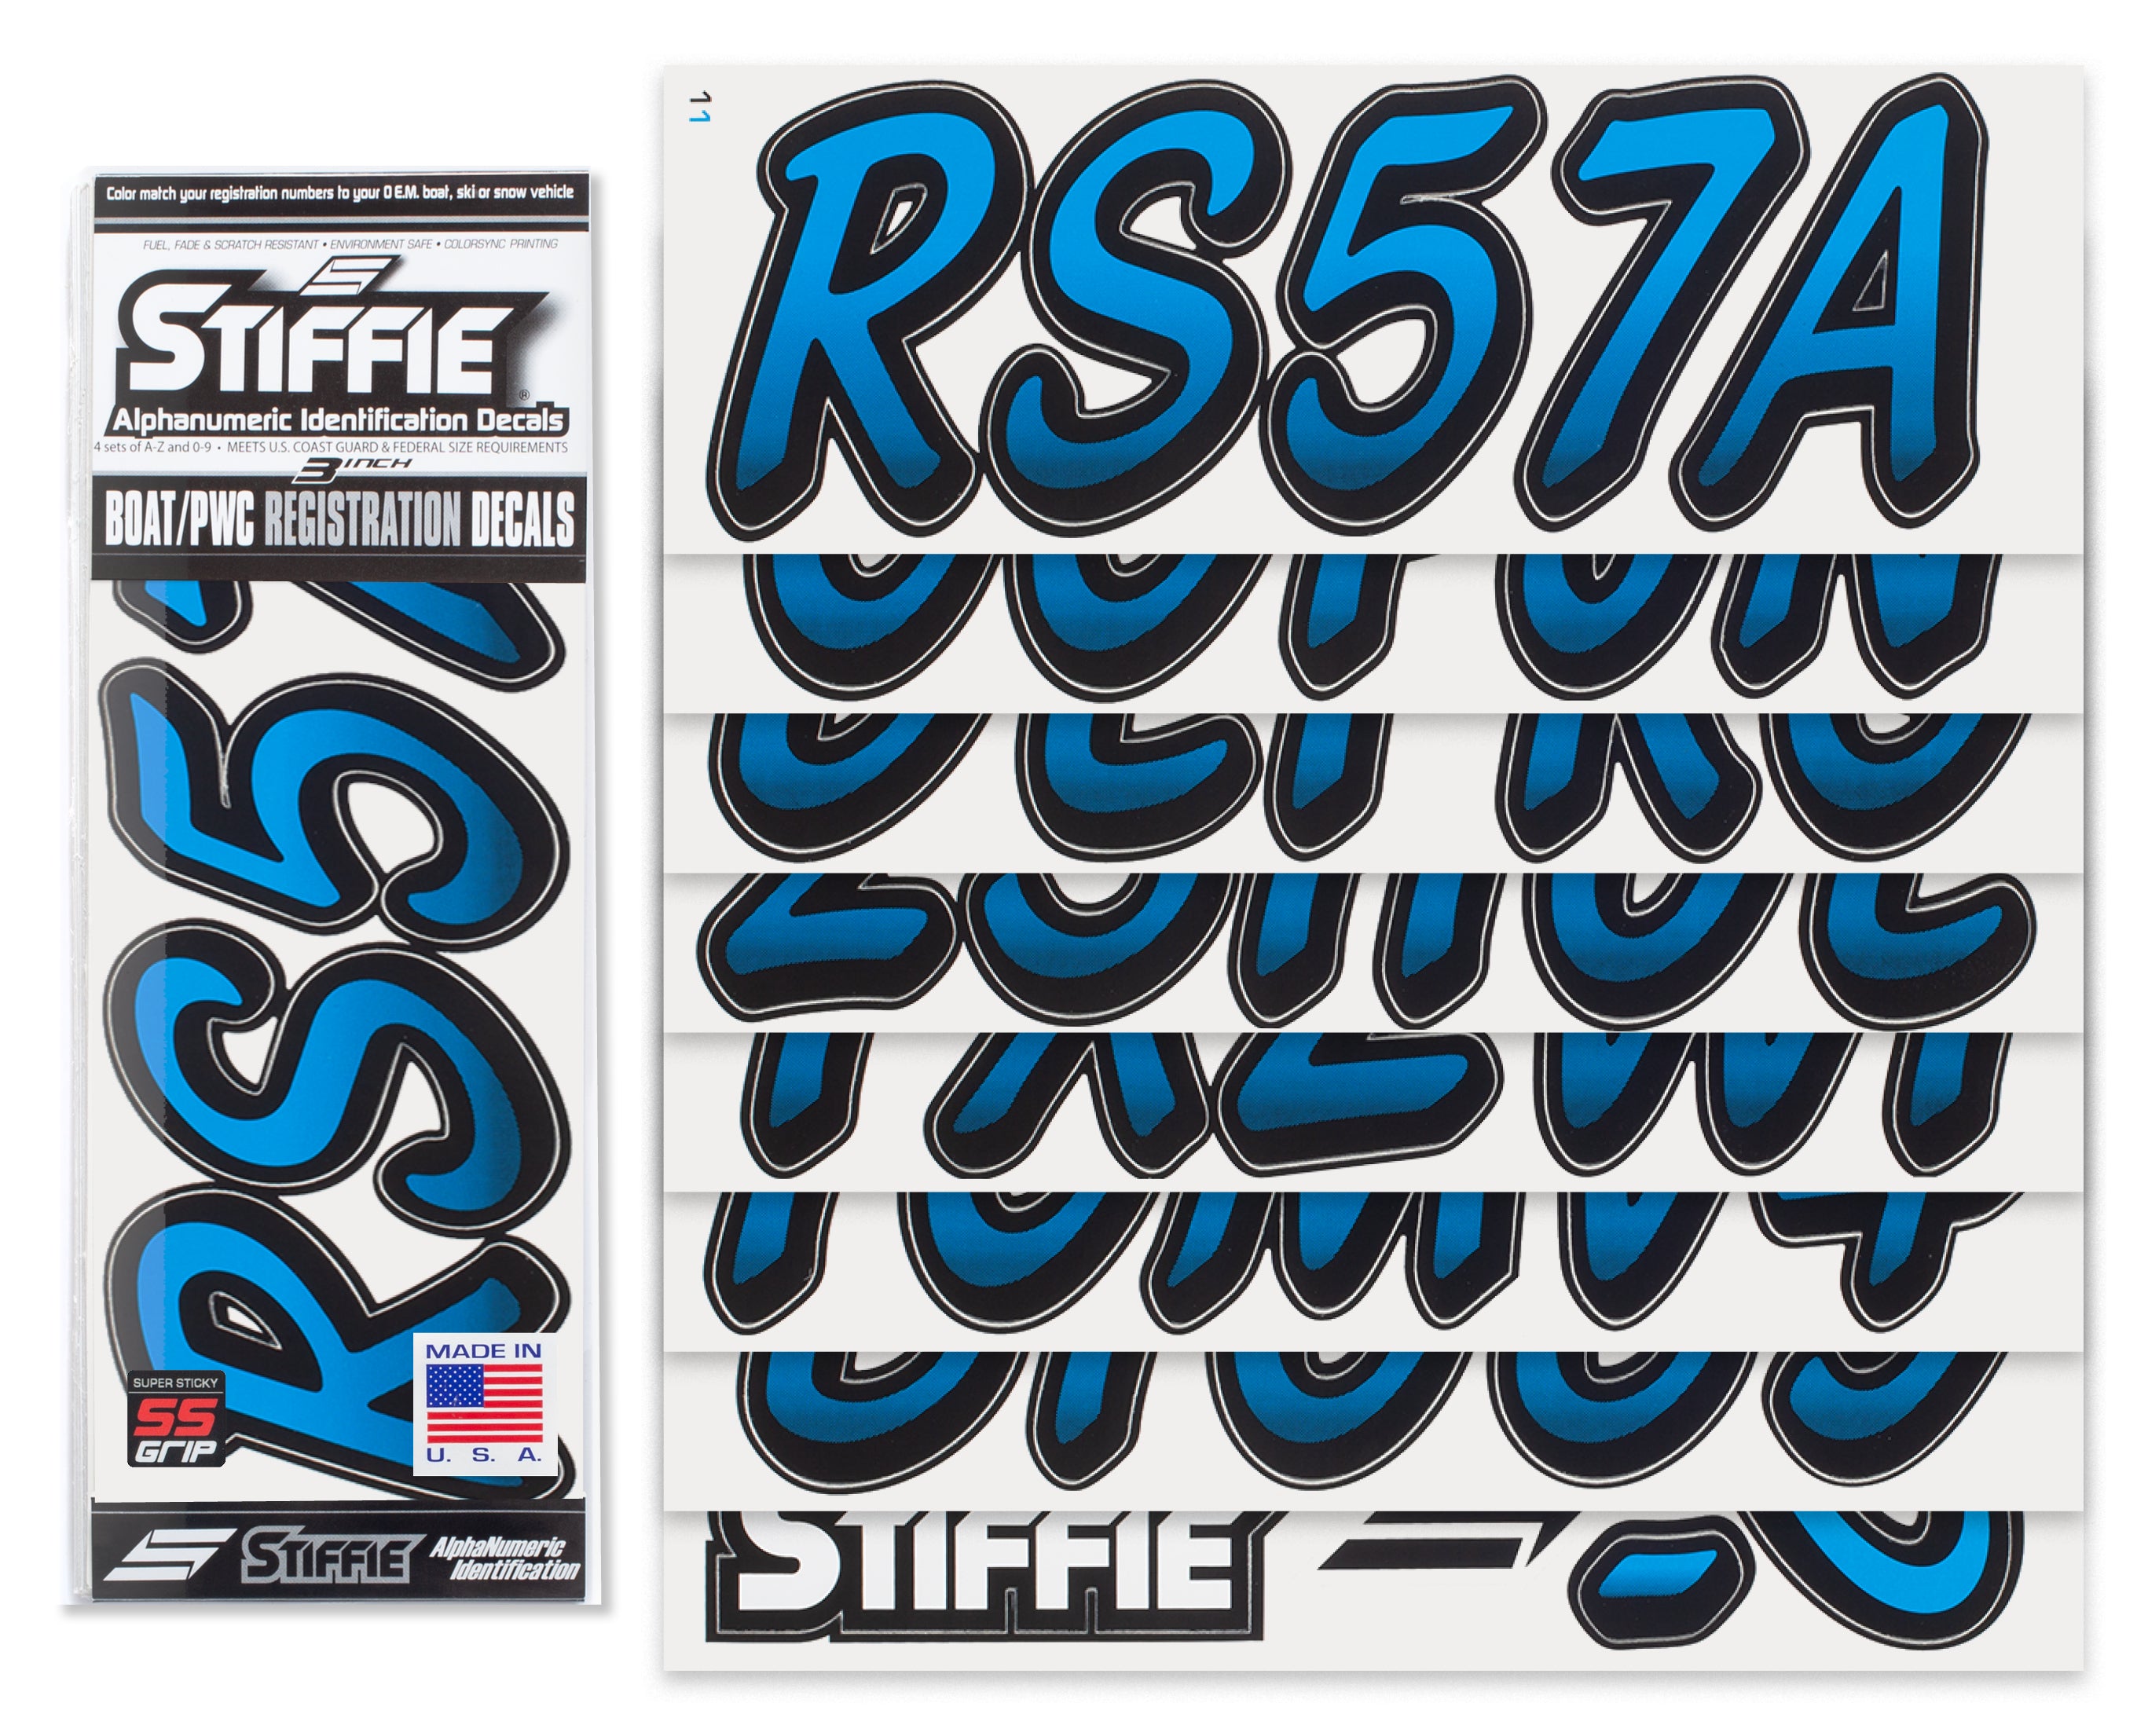 STIFFIE Whipline Blueberry/Black Super Sticky 3" Alpha Numeric Registration Identification Numbers Stickers Decals for Sea-Doo Spark, Inflatable Boats, Ribs, Hypalon/PVC, PWC and Boats.